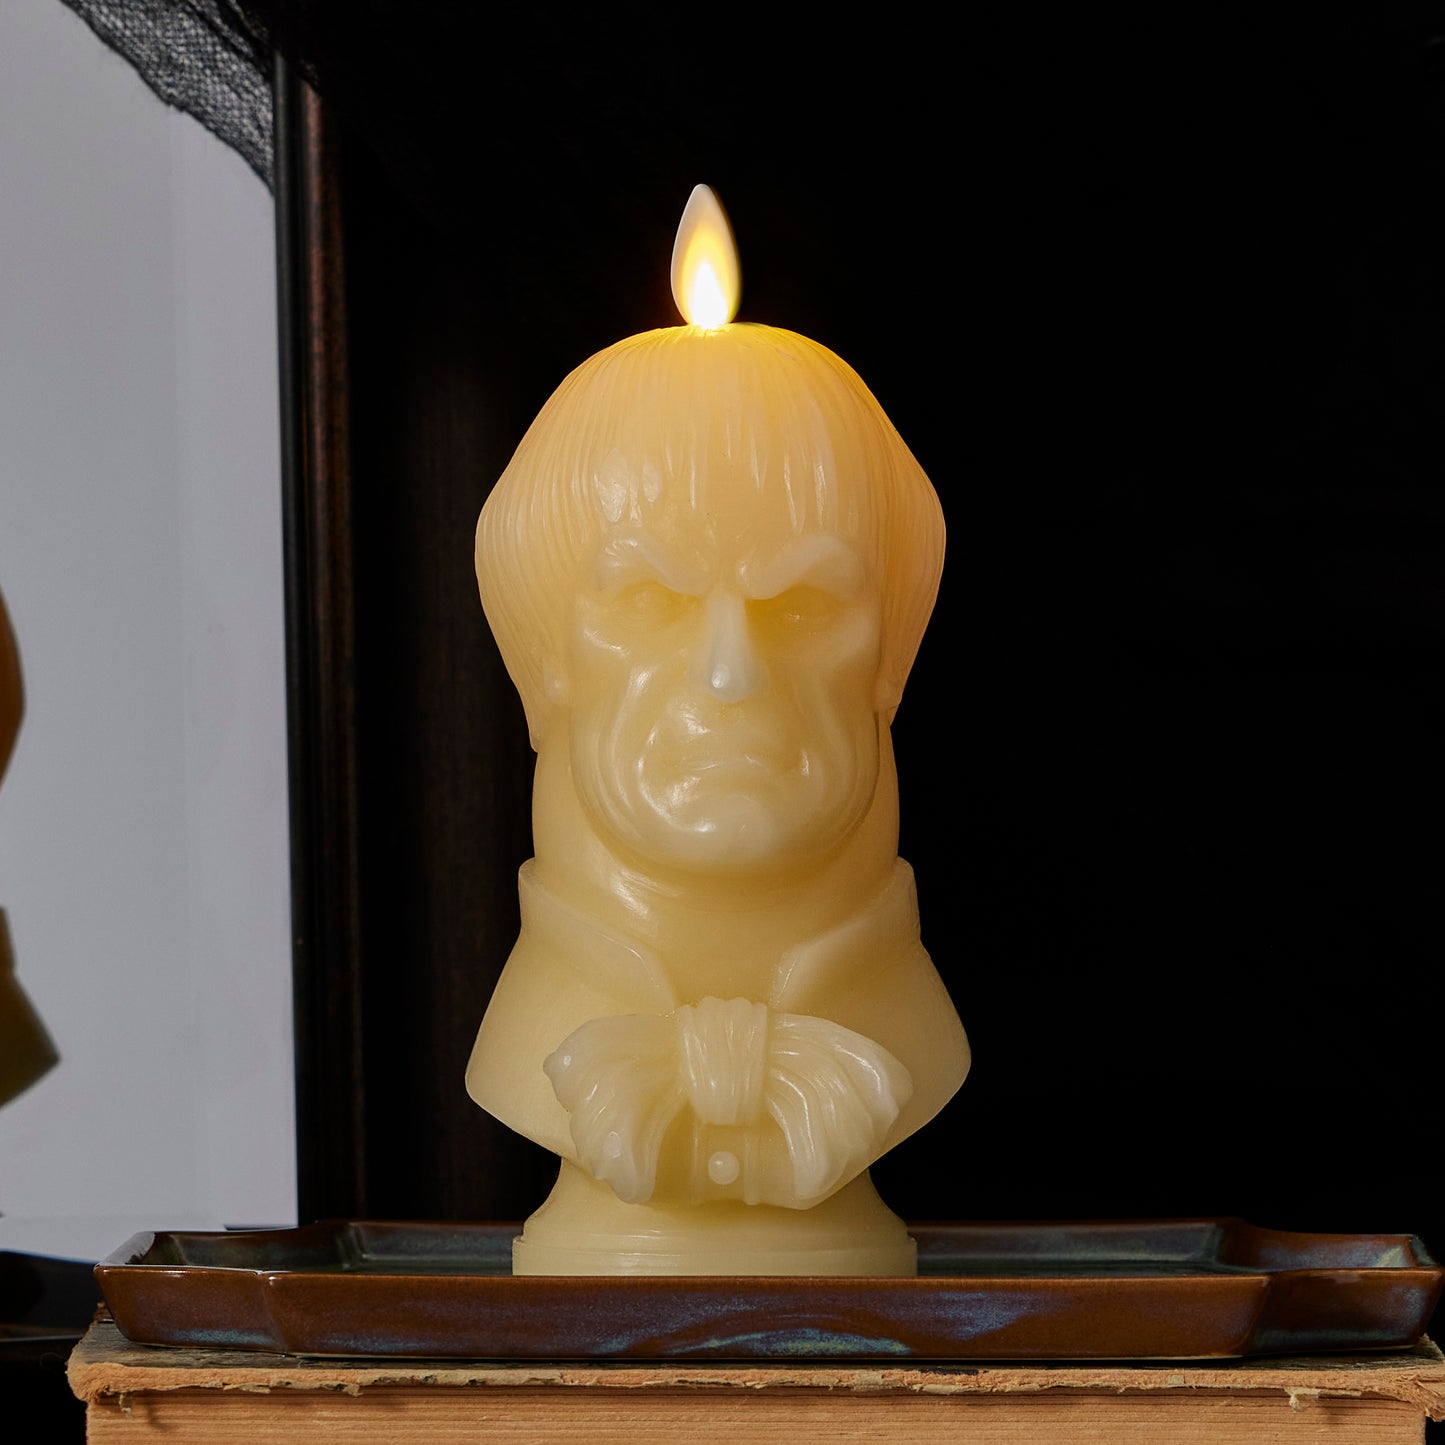 Disney's The Haunted Mansion Flameless Candle Collection